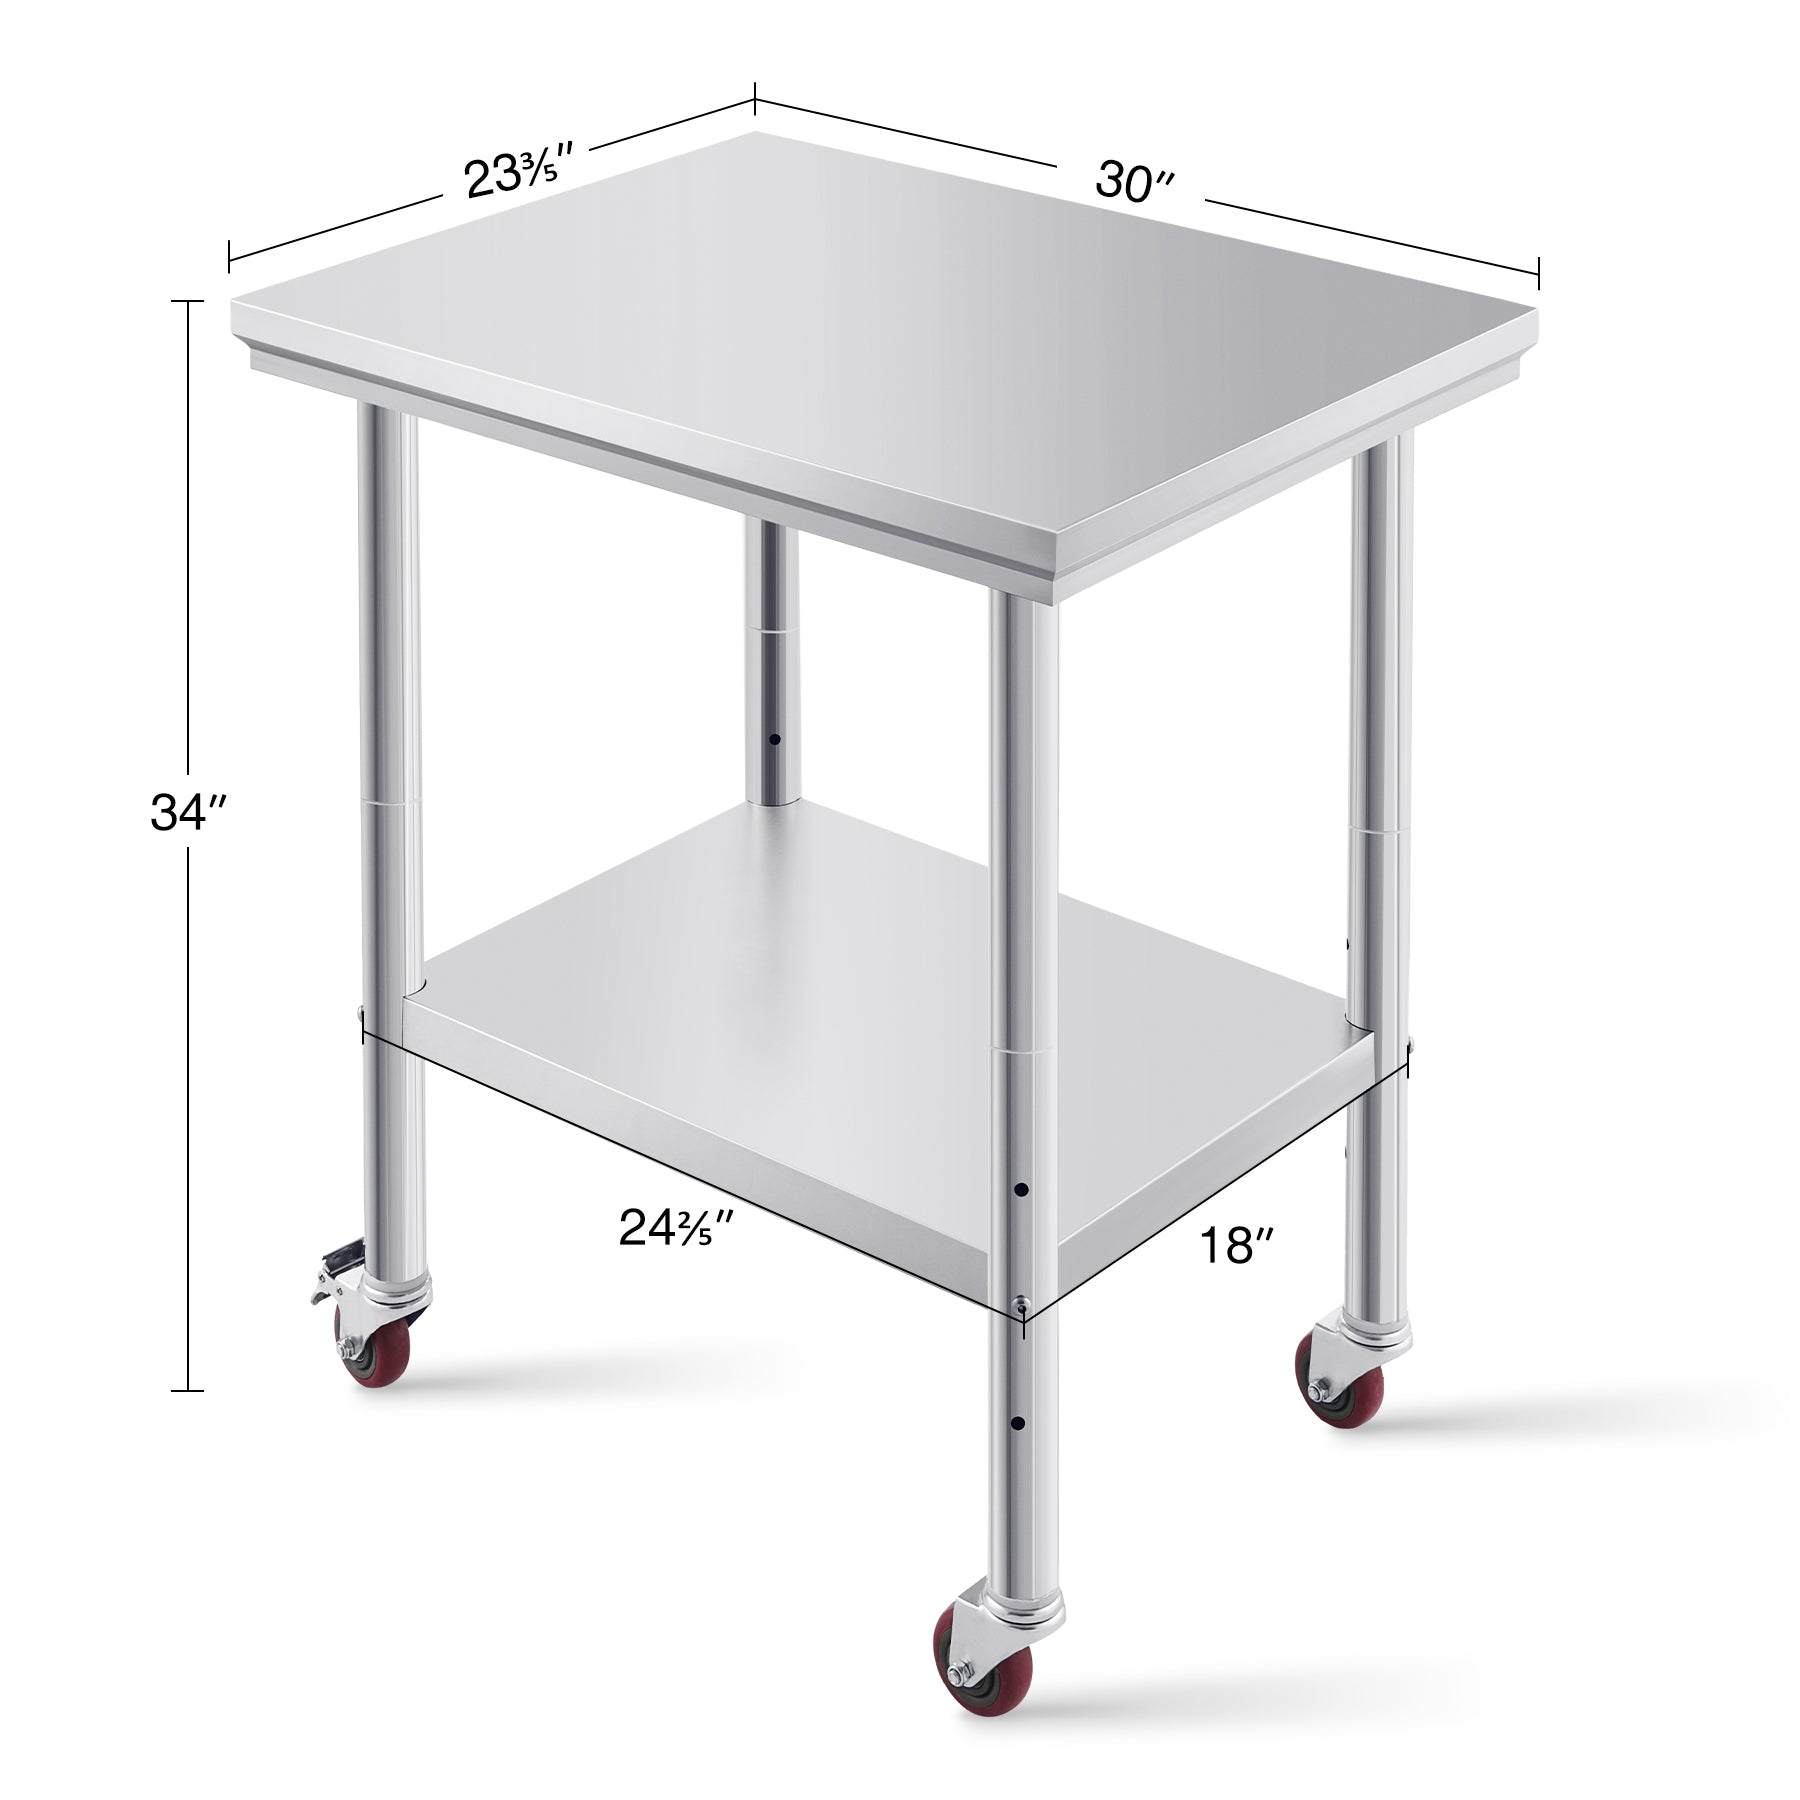 Stainless Steel Commercial Work Table with Wheels - 30